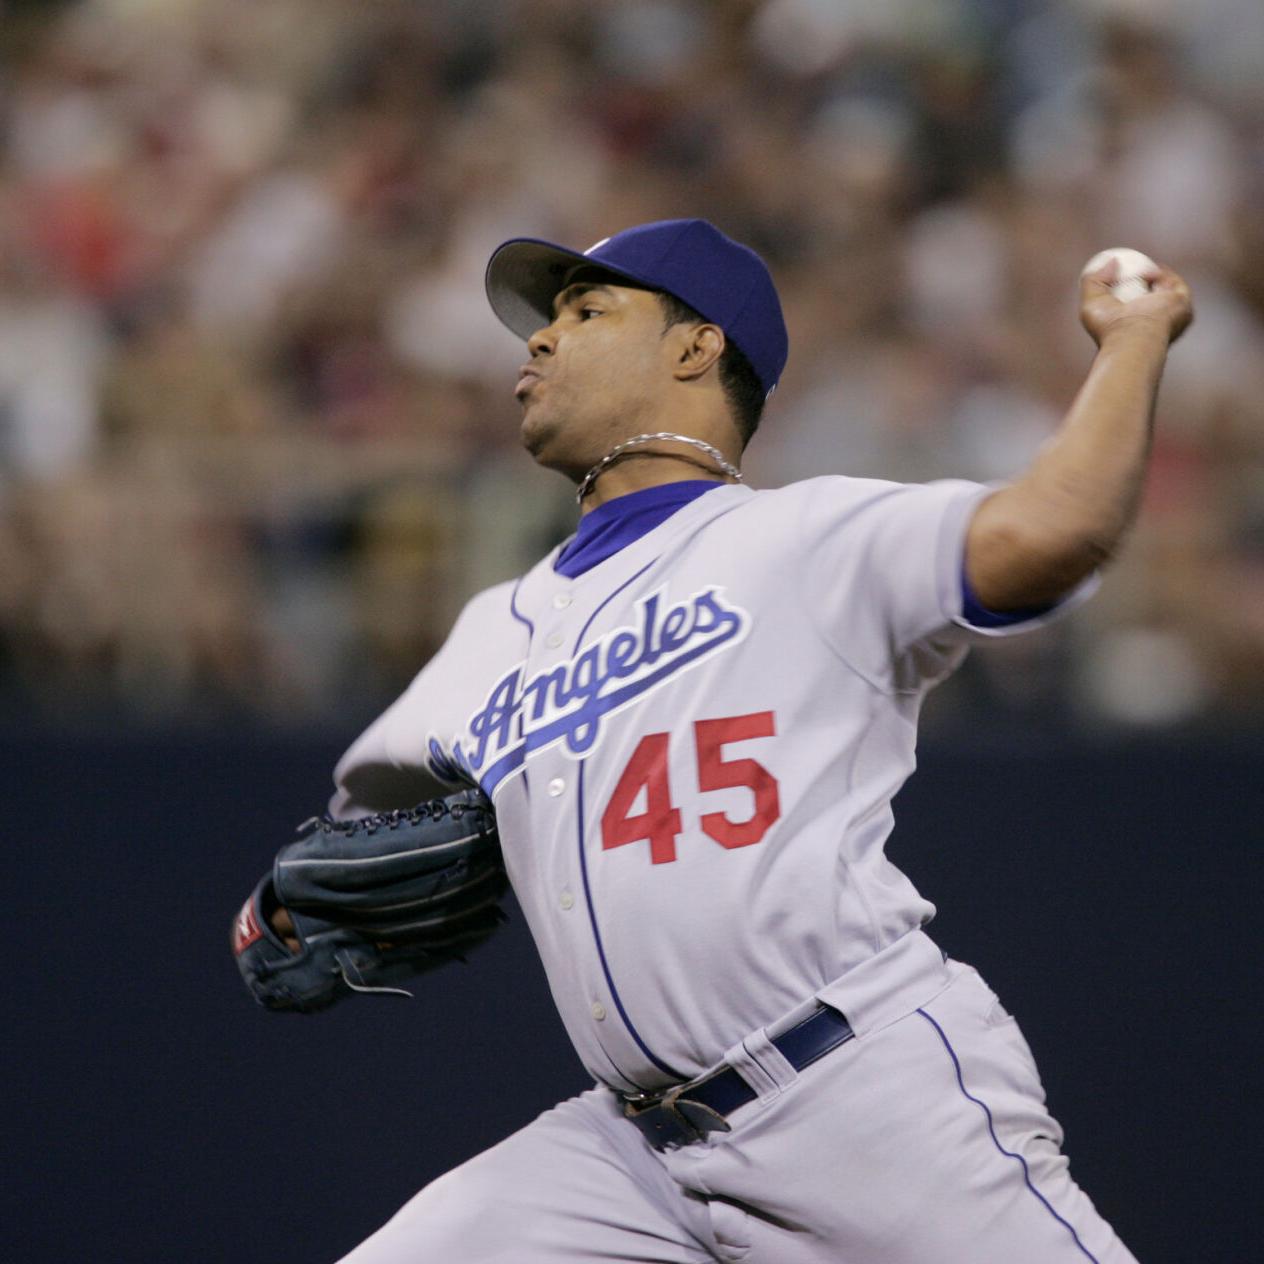 Former Royals pitcher Odalis Pérez dies at the age of 44 - Royals